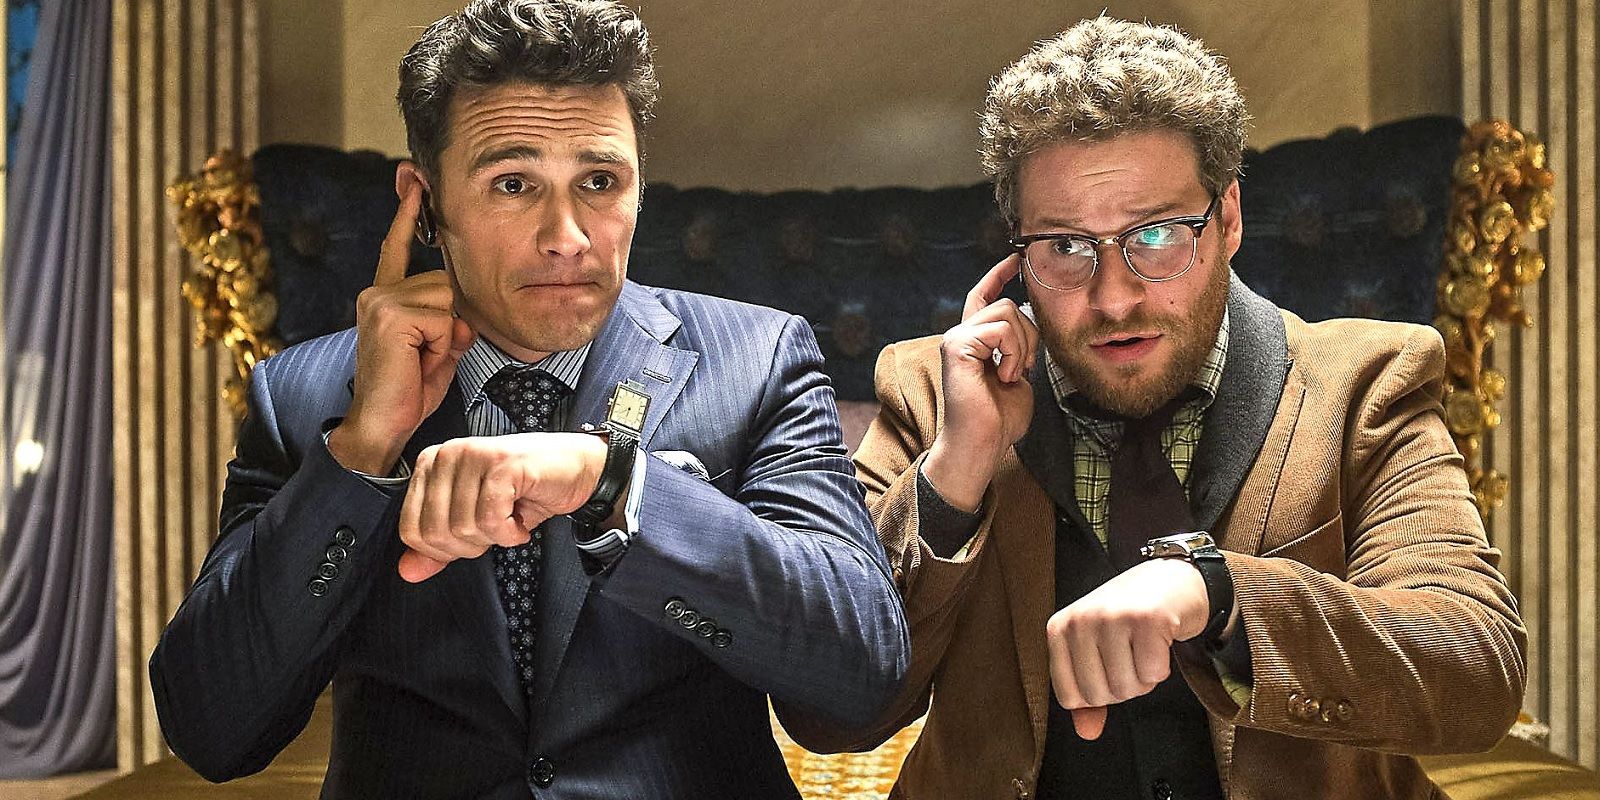 Seth Rogen and James Franco in The Interview